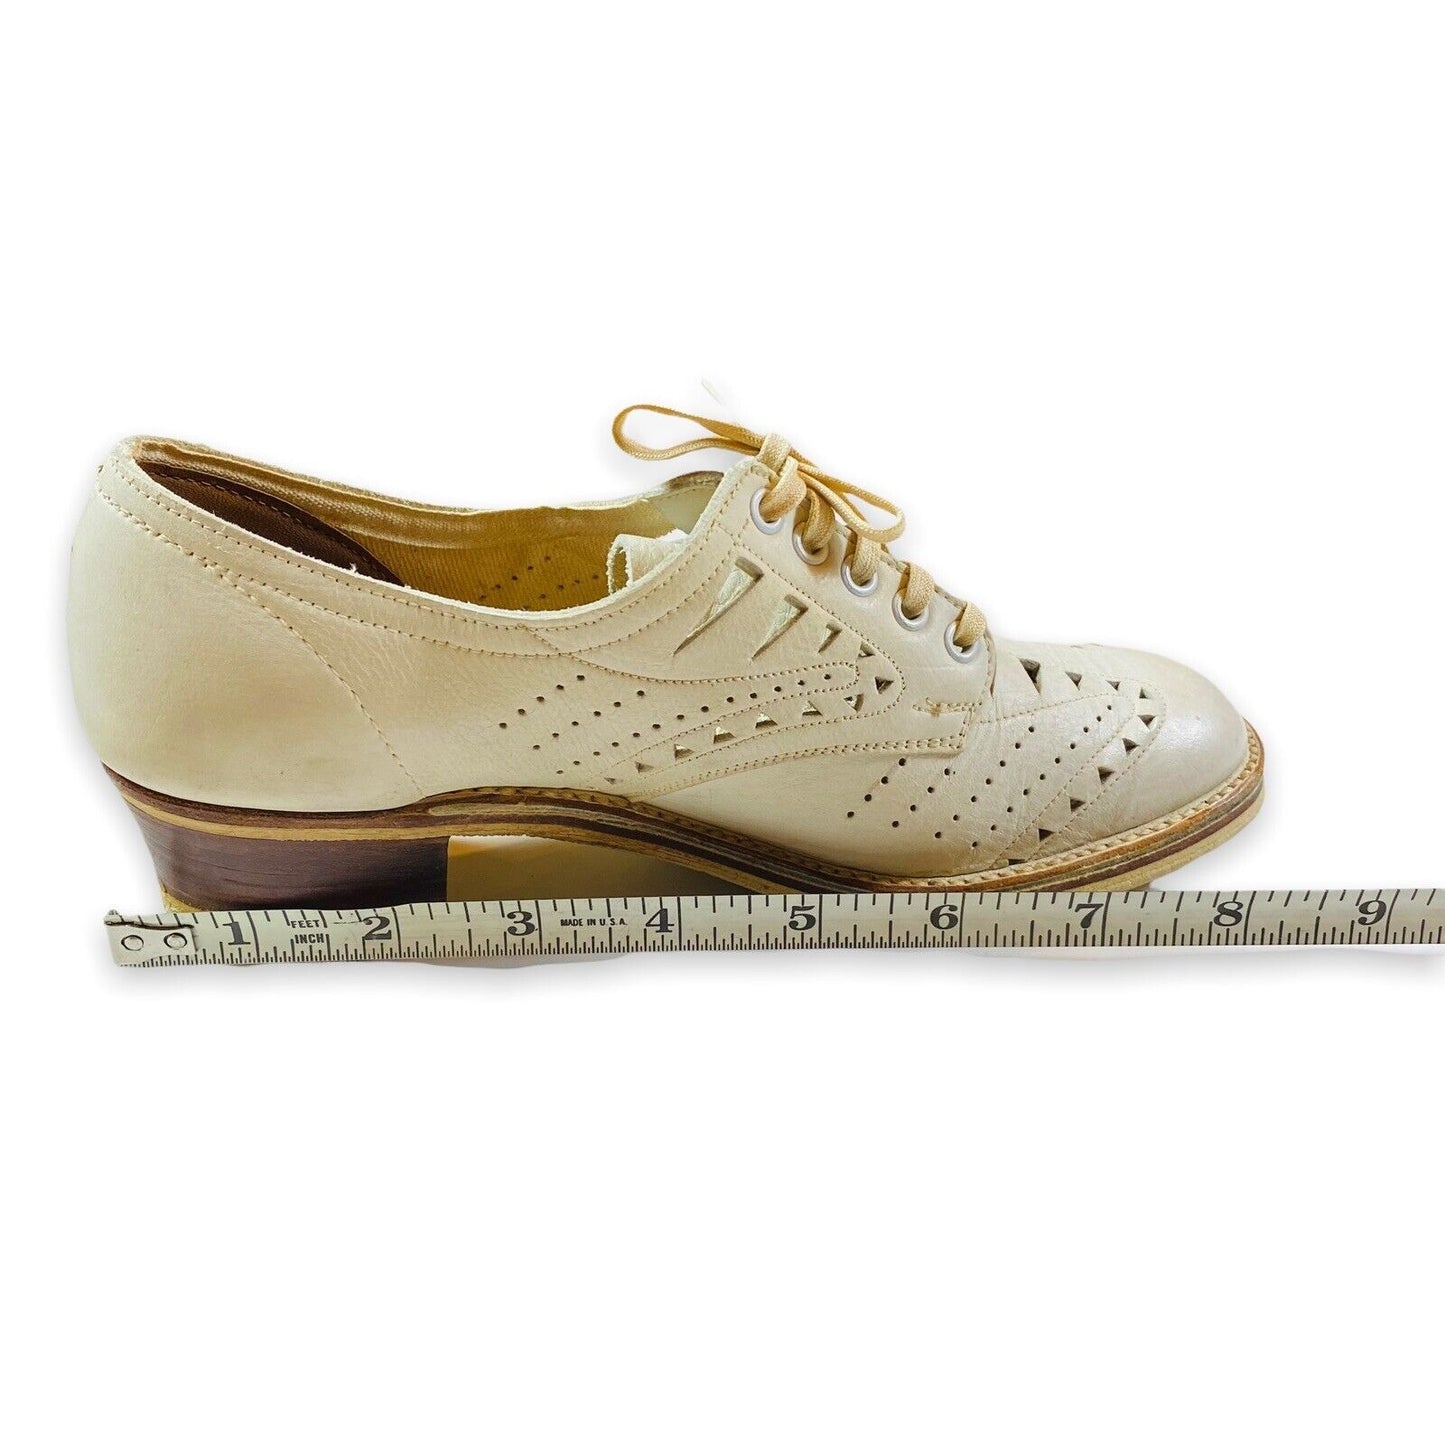 Vintage White Oxford Pumps Lace Up 1940's Style Women's or Child's Shoes